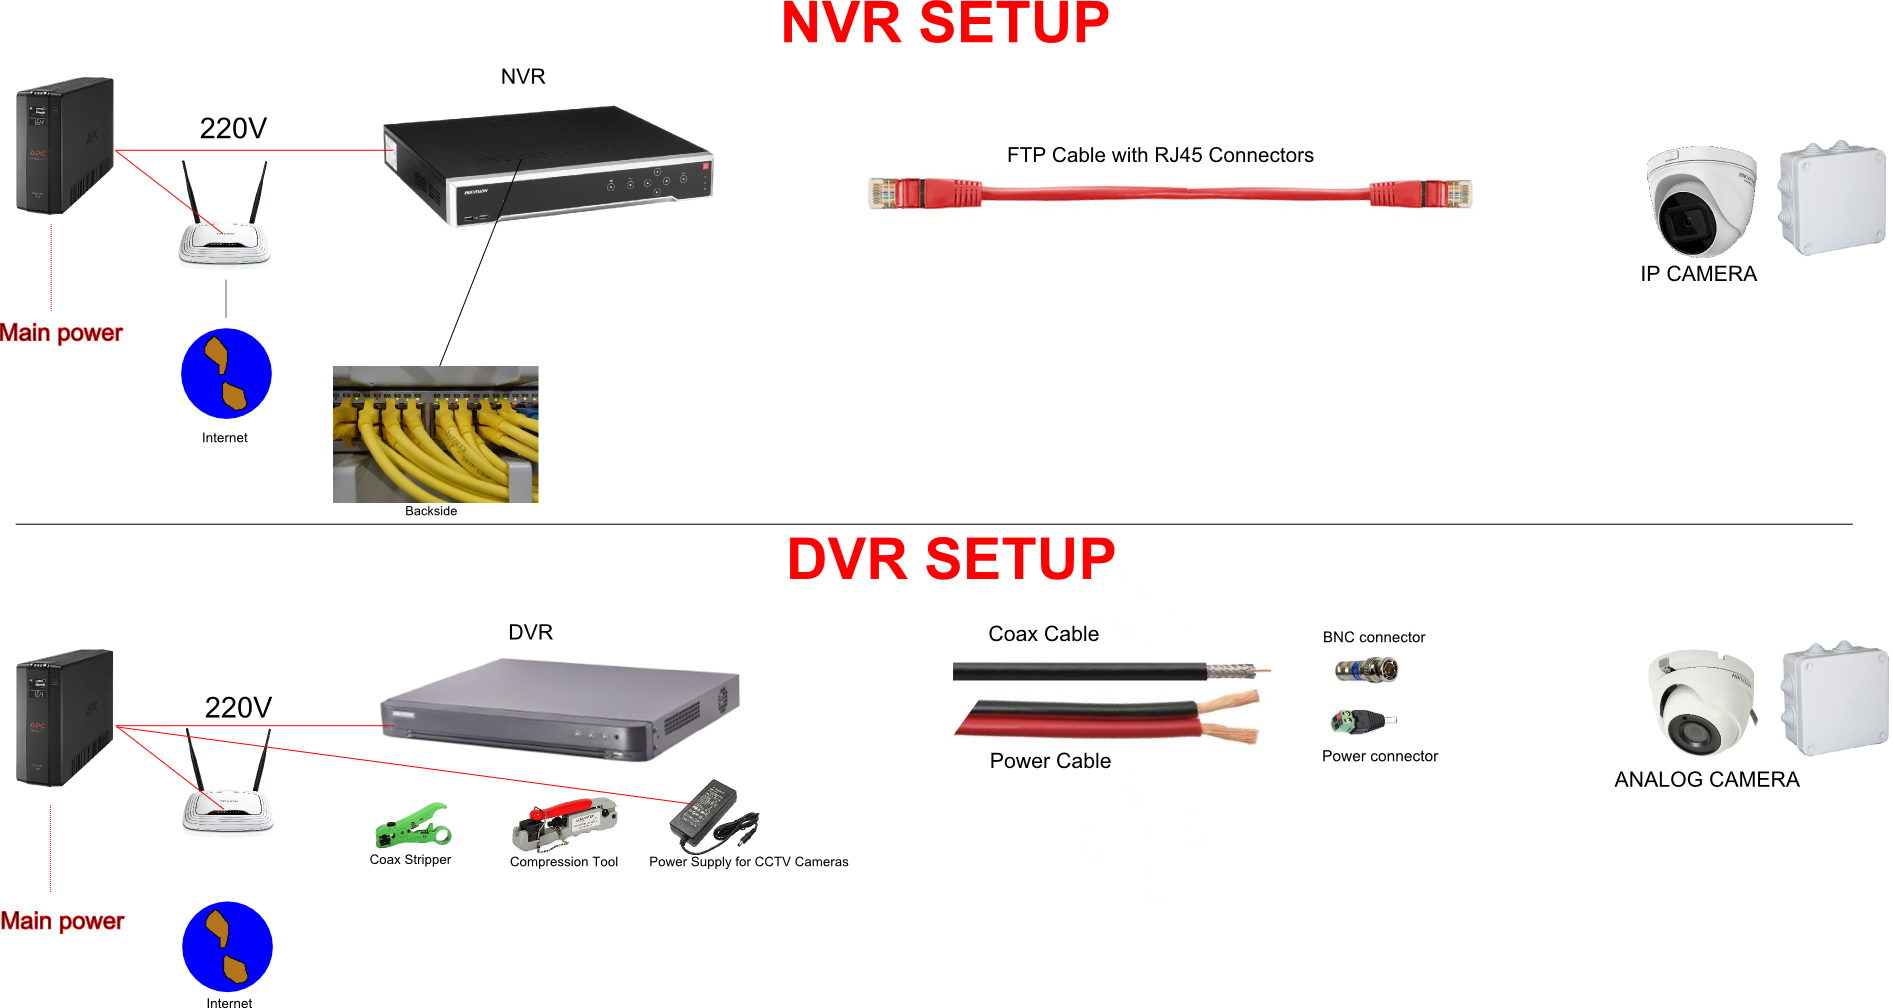 What security system do i need? NVR vs DVR